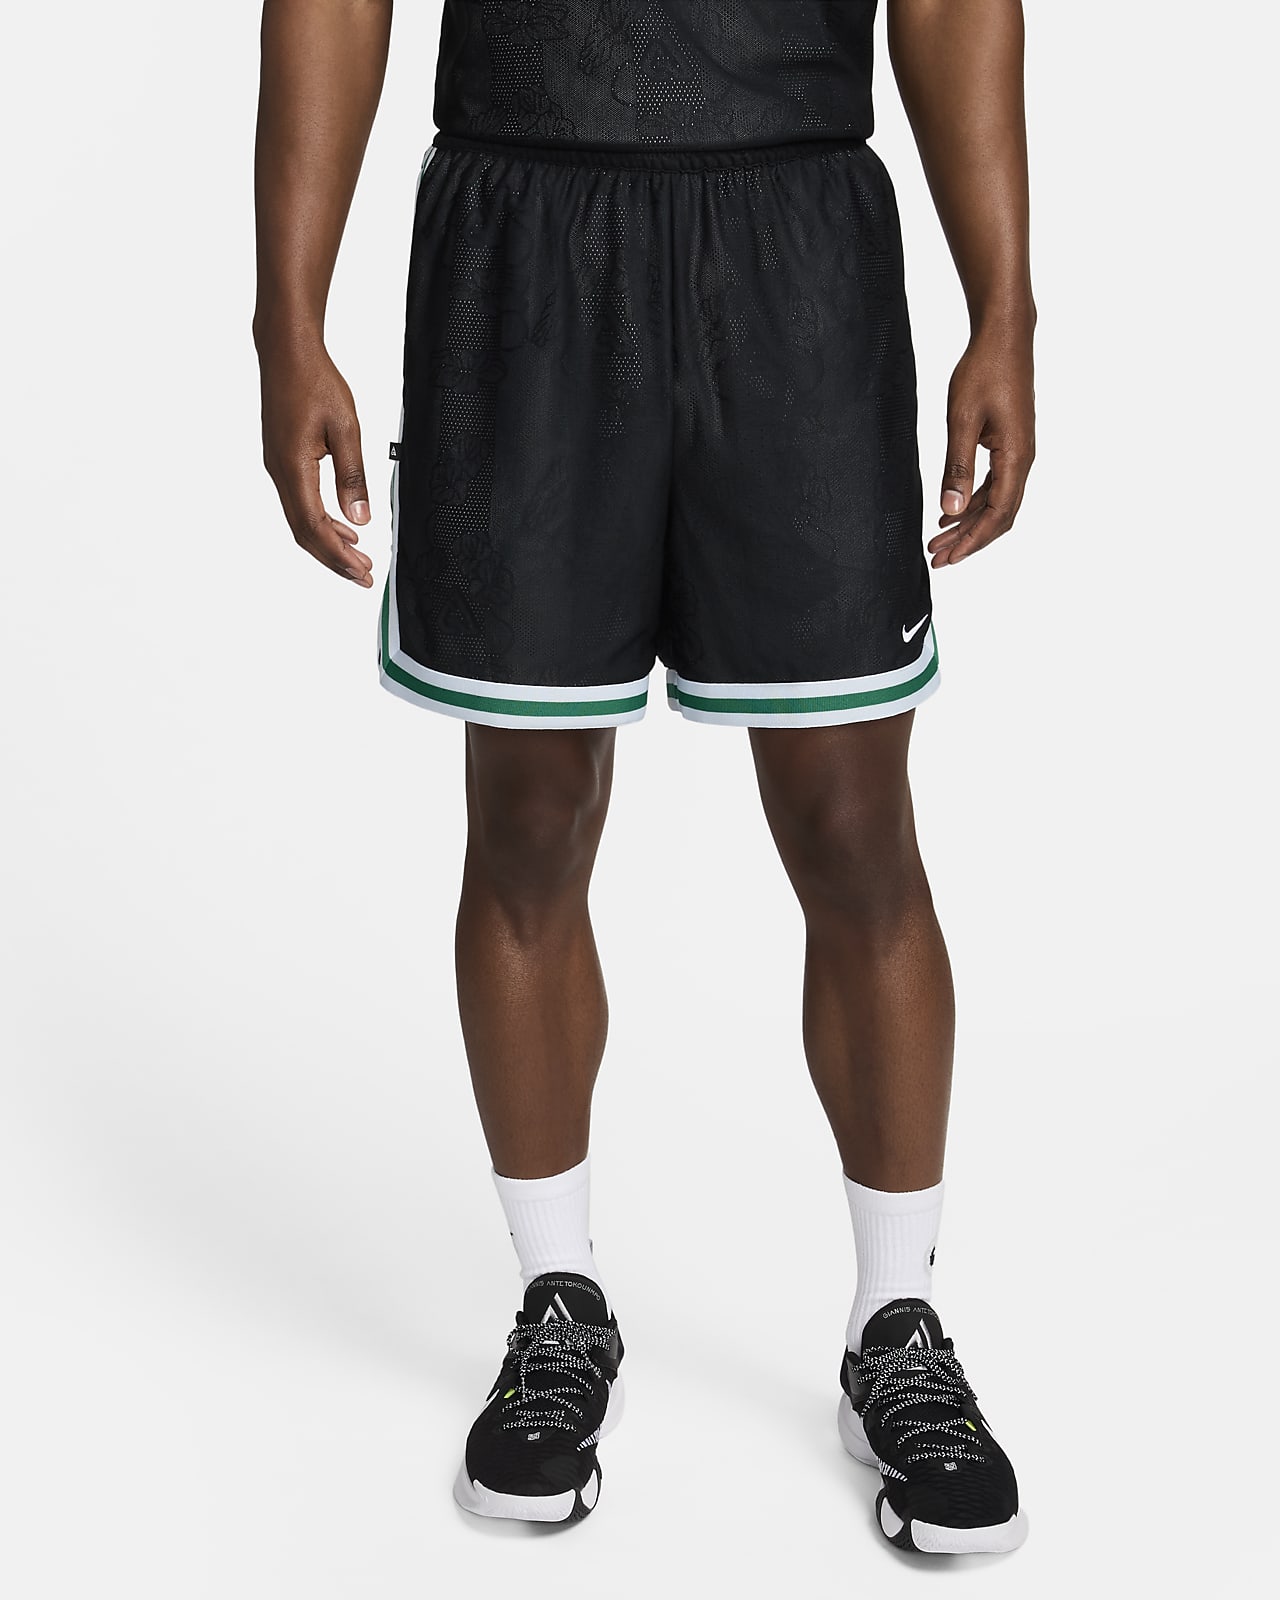 Giannis Men's 15cm (approx.) Dri-FIT DNA Basketball Shorts